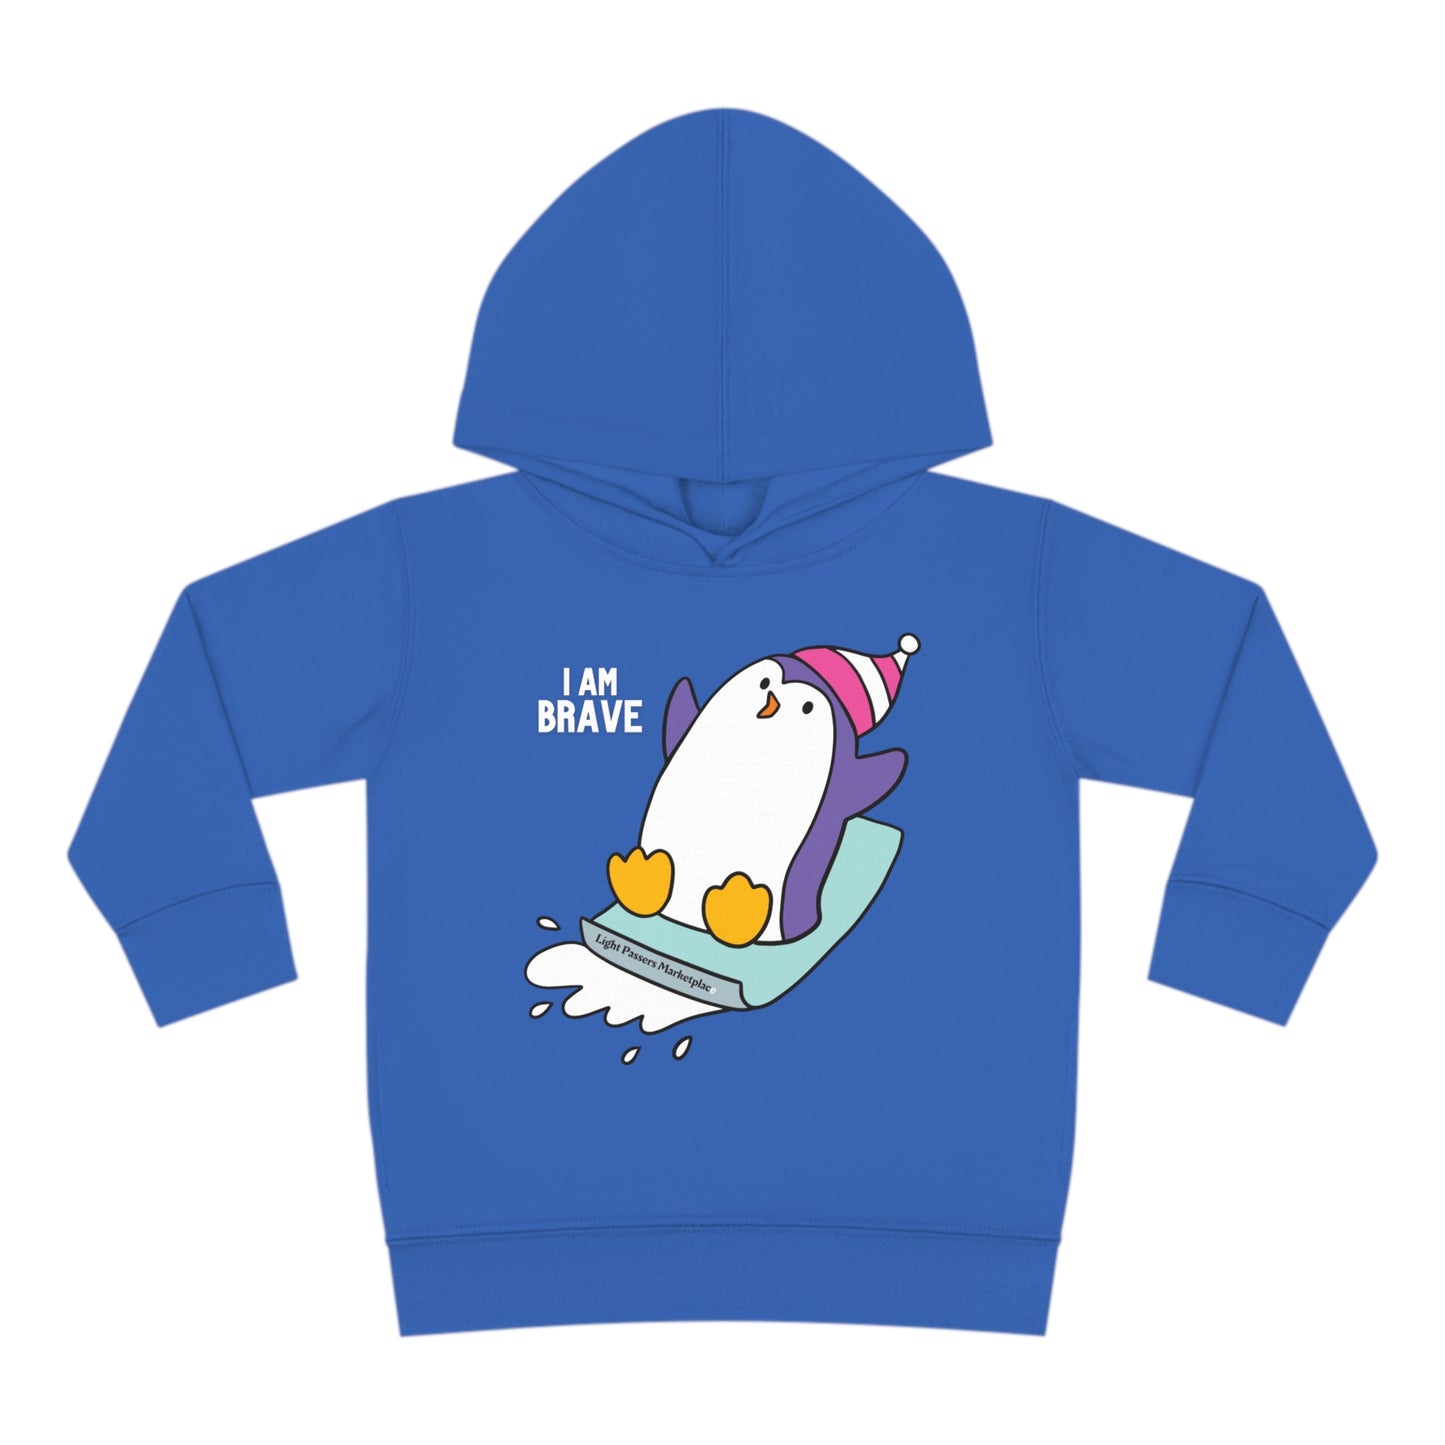 Toddler hoodie featuring Brave Penguin design, jersey-lined hood, double-needle stitching, cover-stitched details, side seam pockets, and EasyTear™ label for comfort and durability.